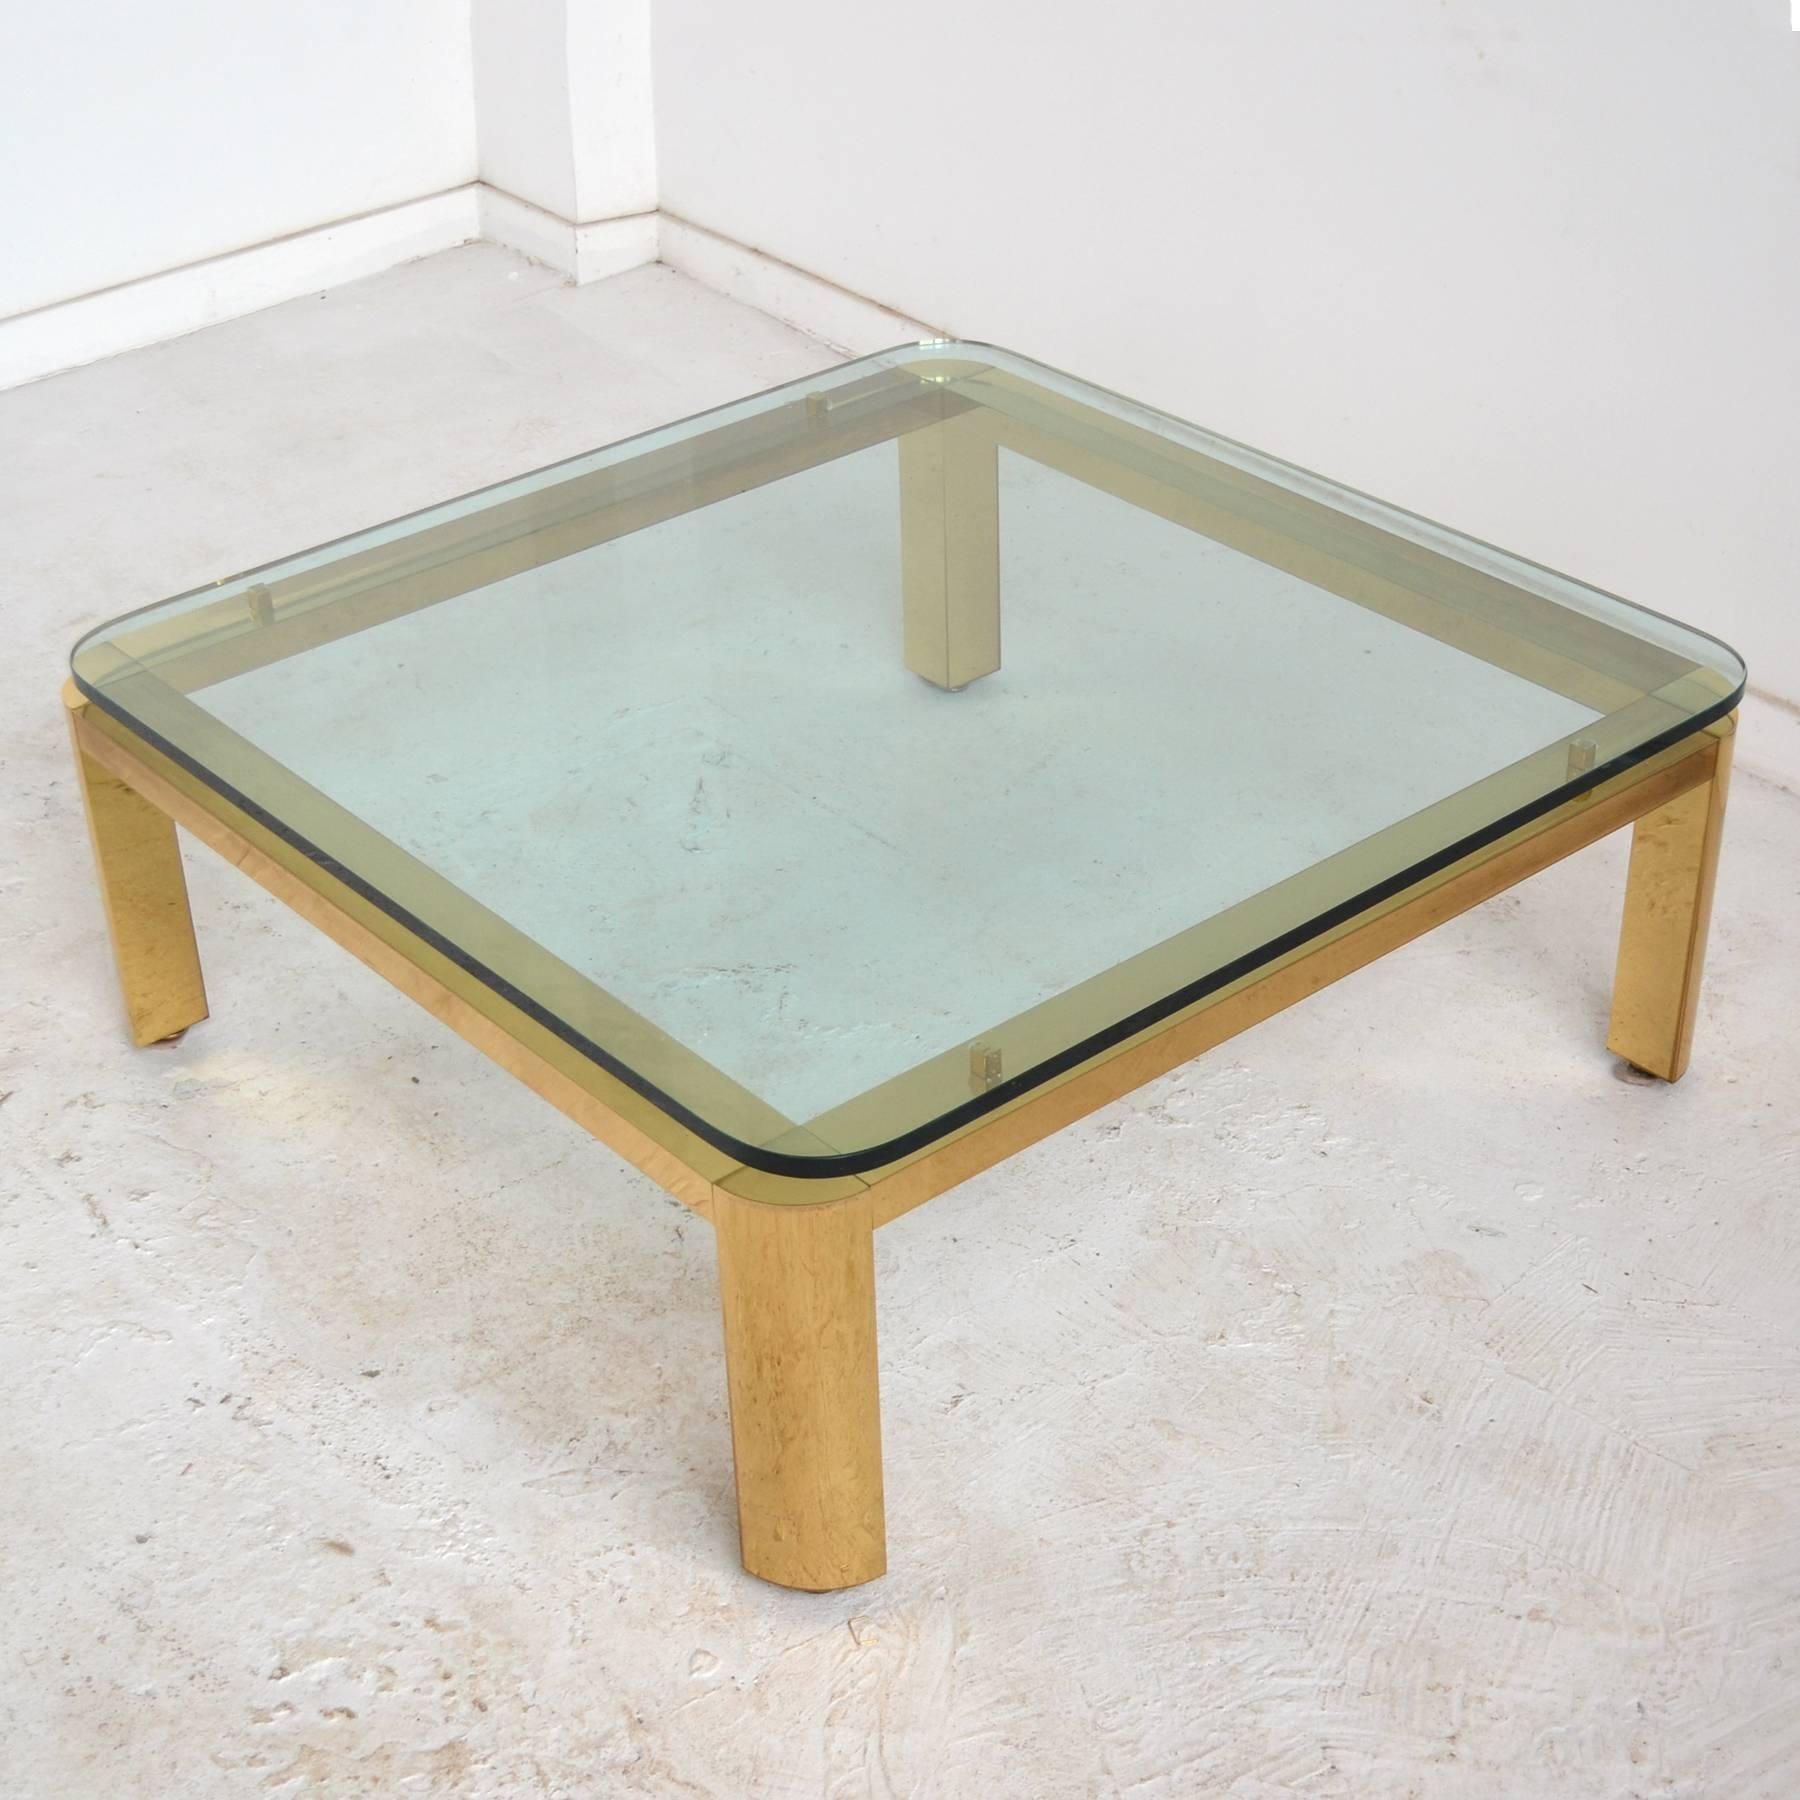 A largely scaled coffee table with an elegant brass base supporting a thick glass top with radiused corners.